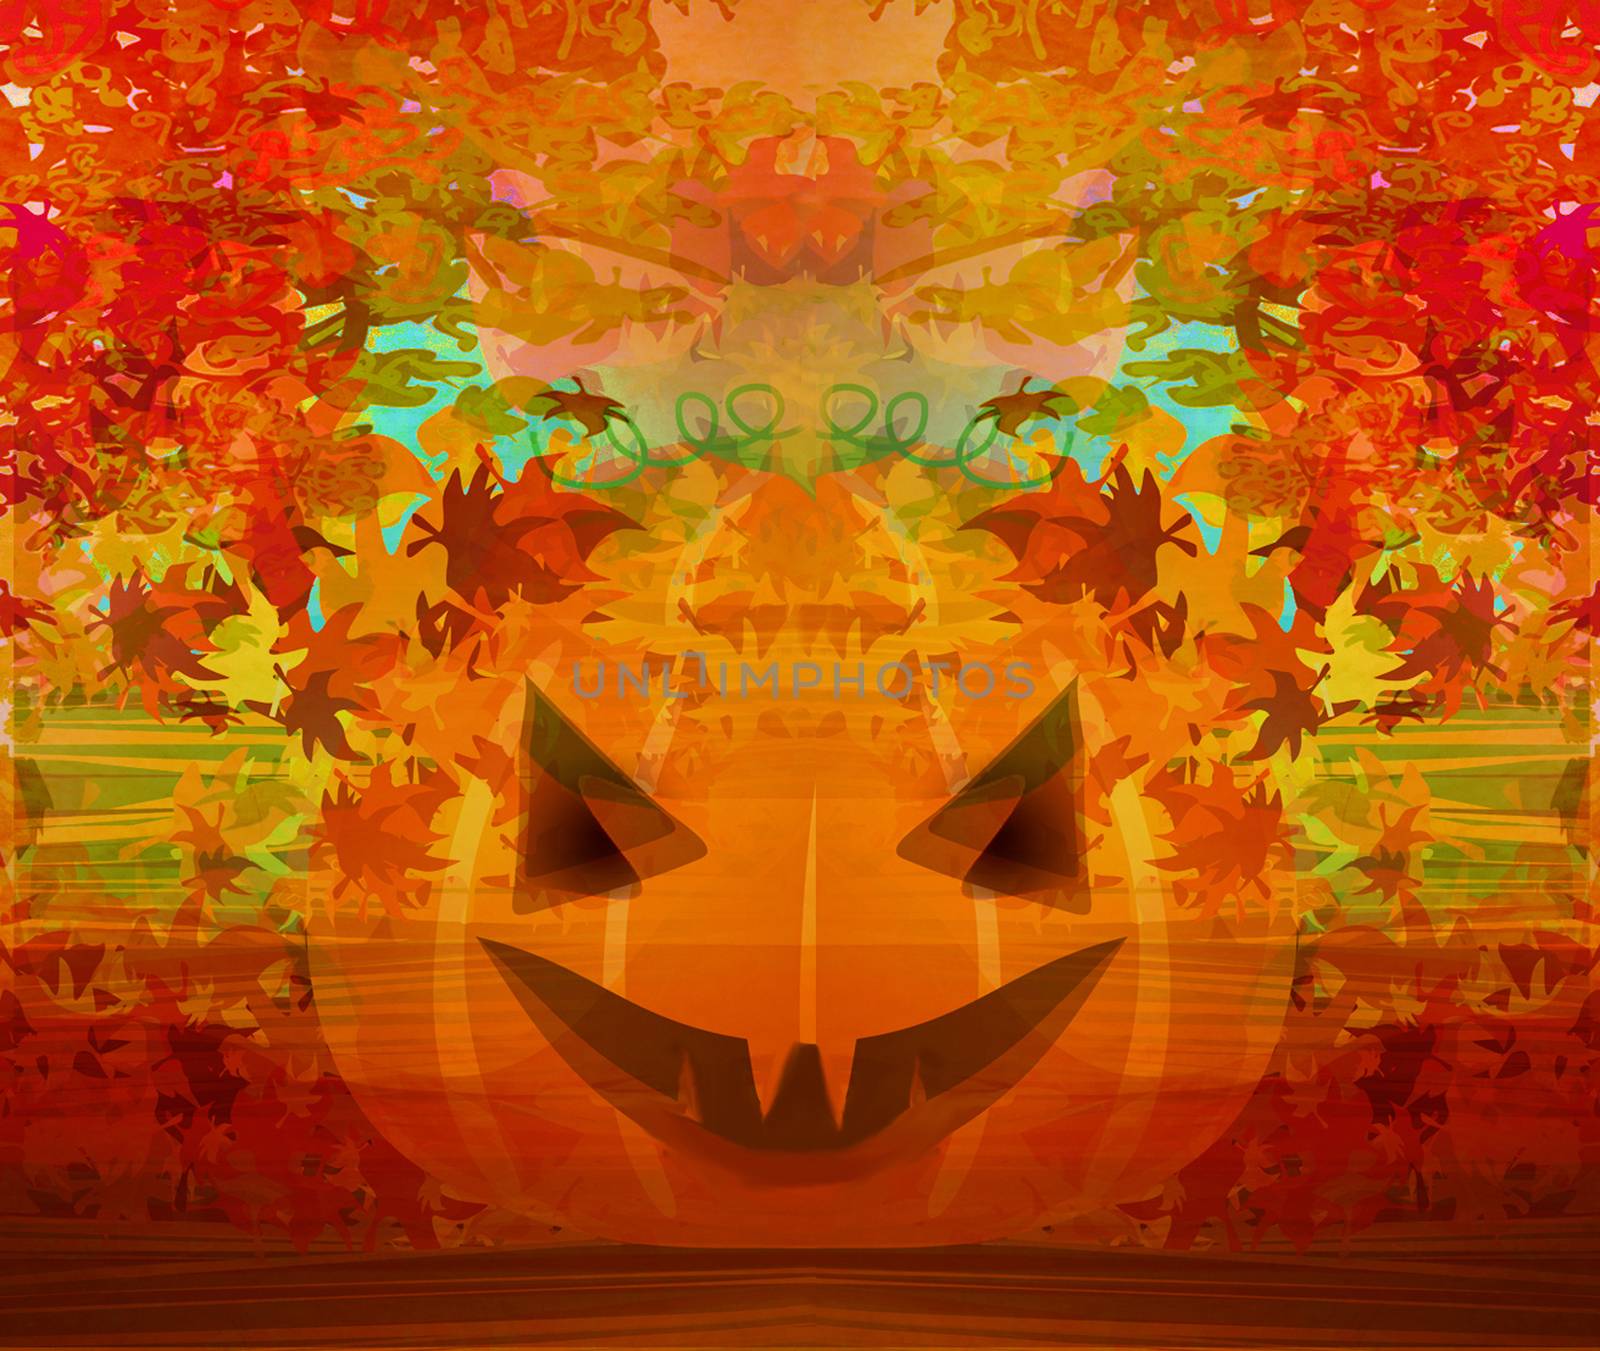 Scary Halloween pumpkin with leaves by JackyBrown